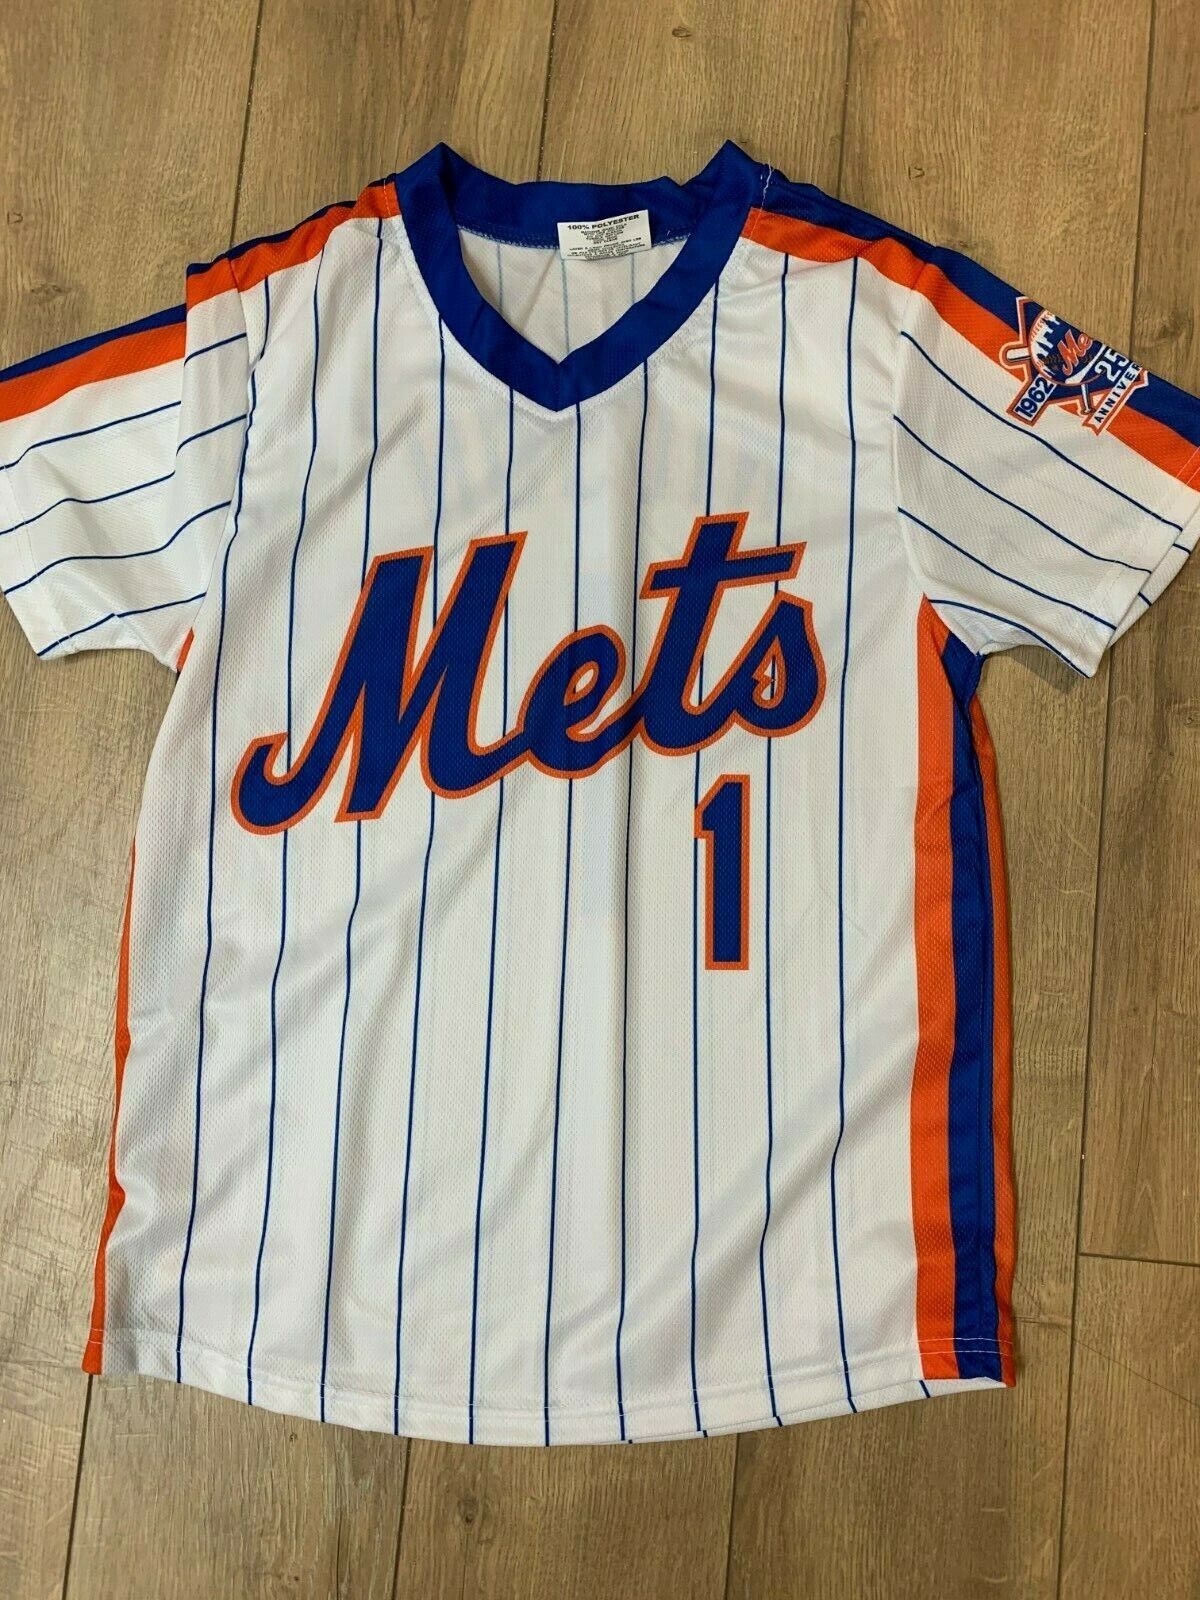 Mets promotional jersey No. 1 Wilson size S EUC